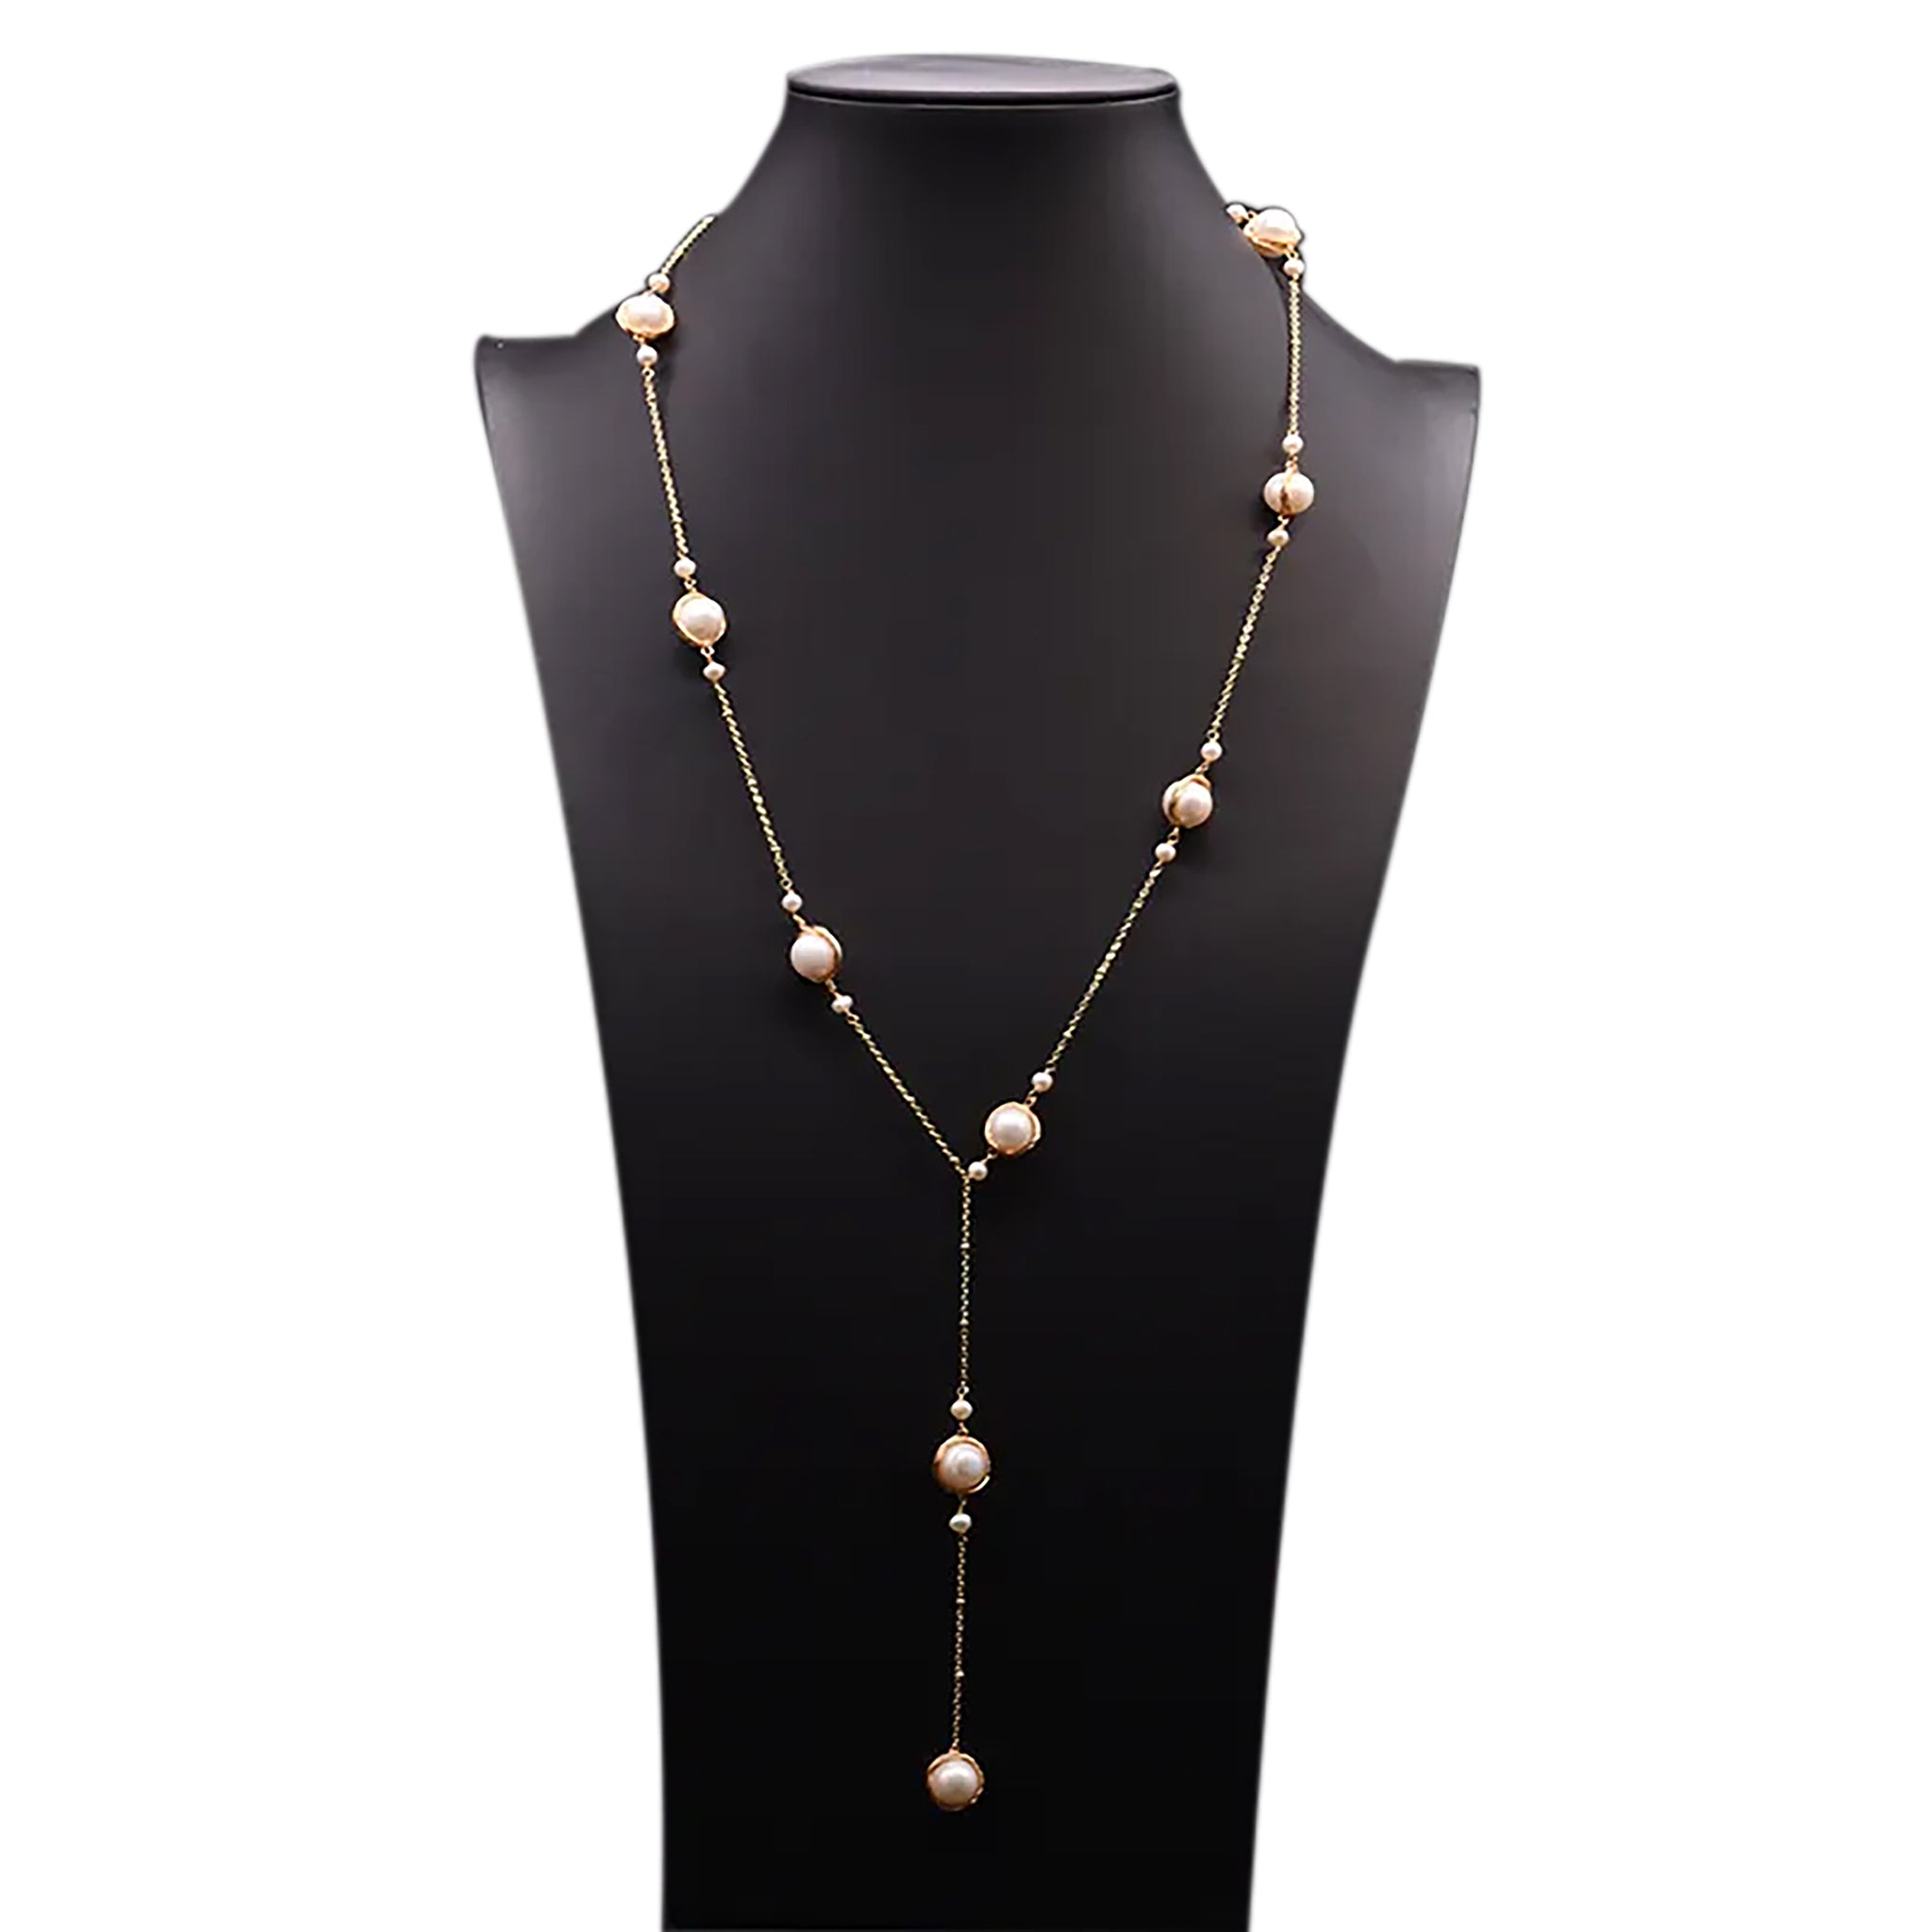 Chokore Drop Necklace with Freshwater Pearl